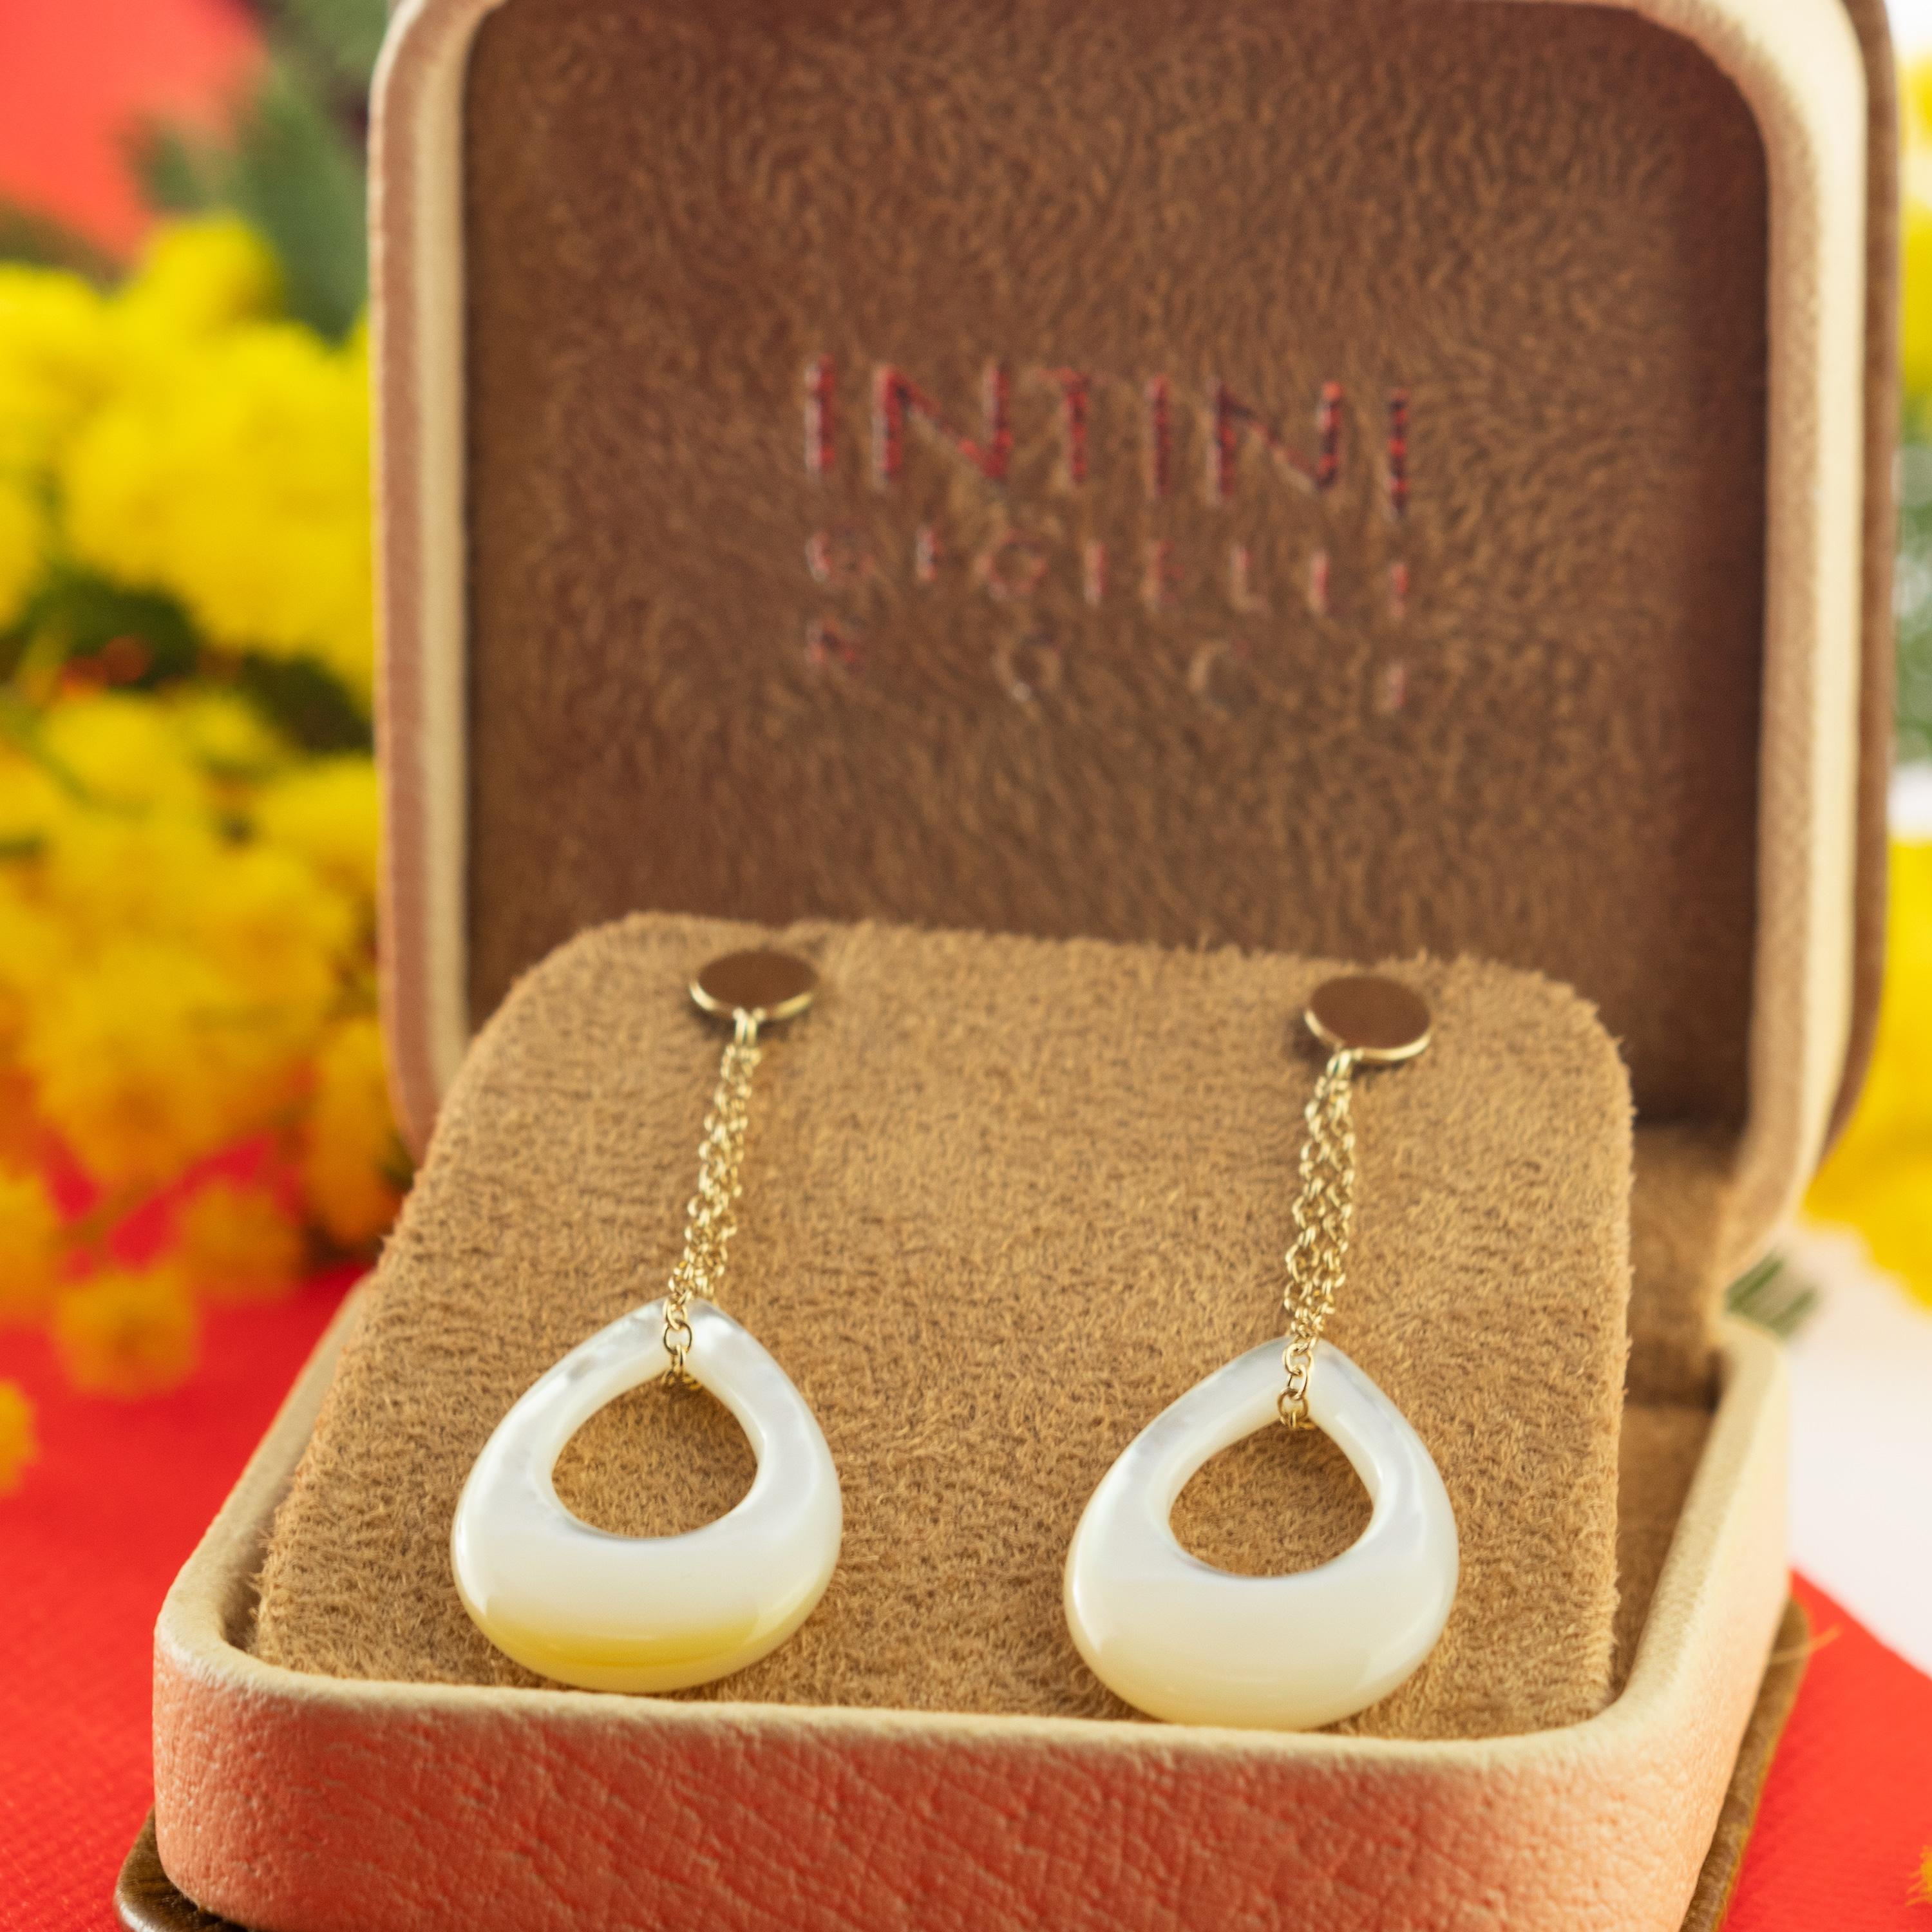 Light weighted pendulum earrings born in the Intini Jewels workshop. Our designers add all the Italian modern style and glamour in one exquisite piece. Marvellous mother of pearl elements, hanging from a 18 karat yellow gold chain.

These jewels are